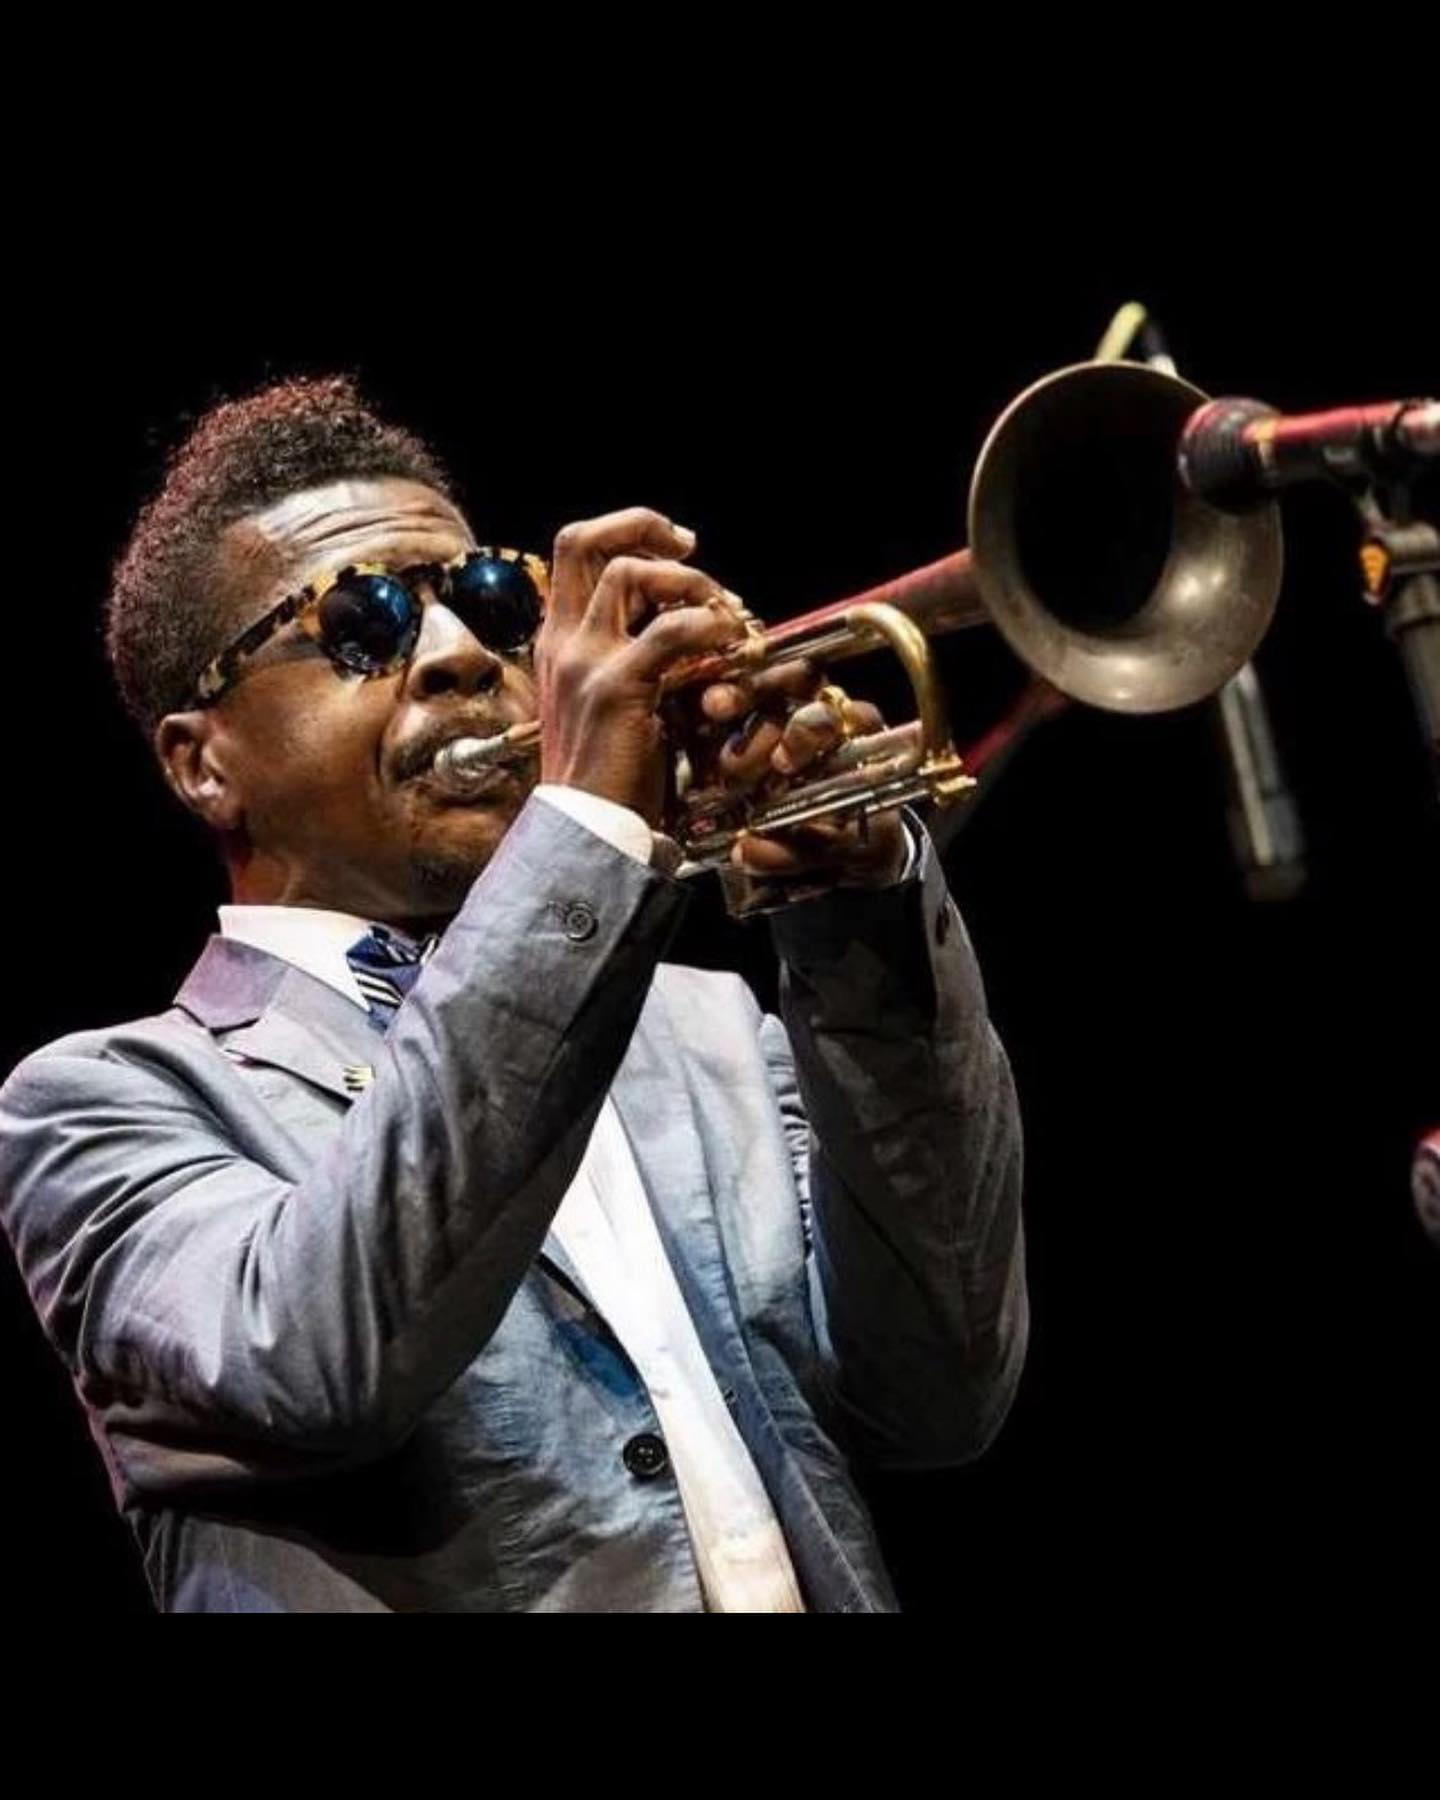 image  1 Jazz, Blues And Lounge Music - American legendary trumpet player Roy Hargrove #royhargrove #trumpet